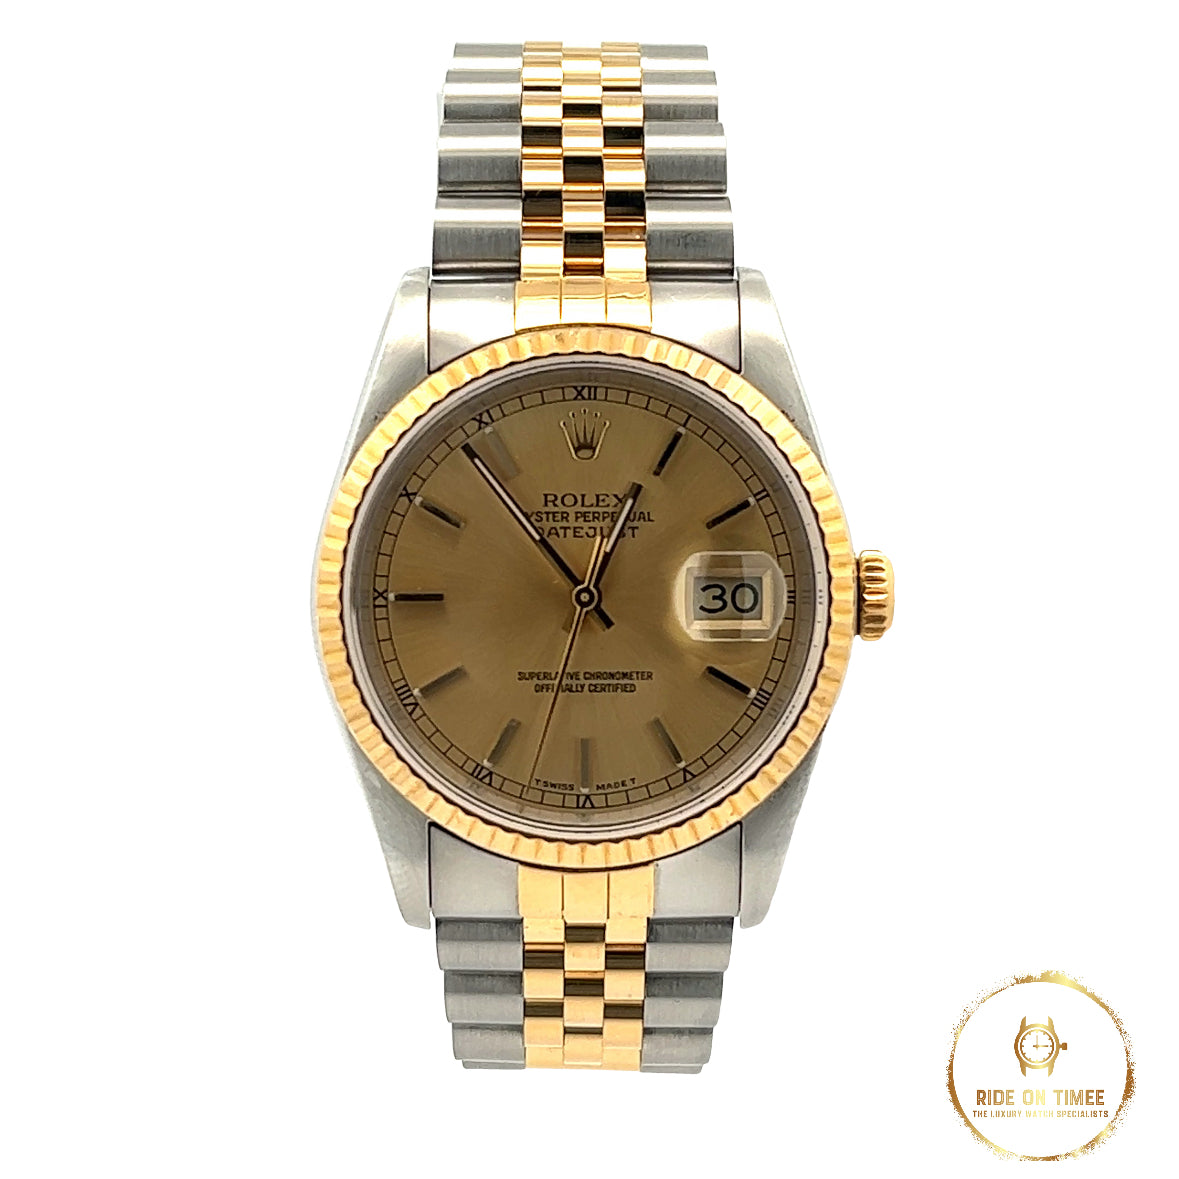 Rolex Datejust 36mm Factory Champagne Baton Dial ‘16233’ - Ride On Timee